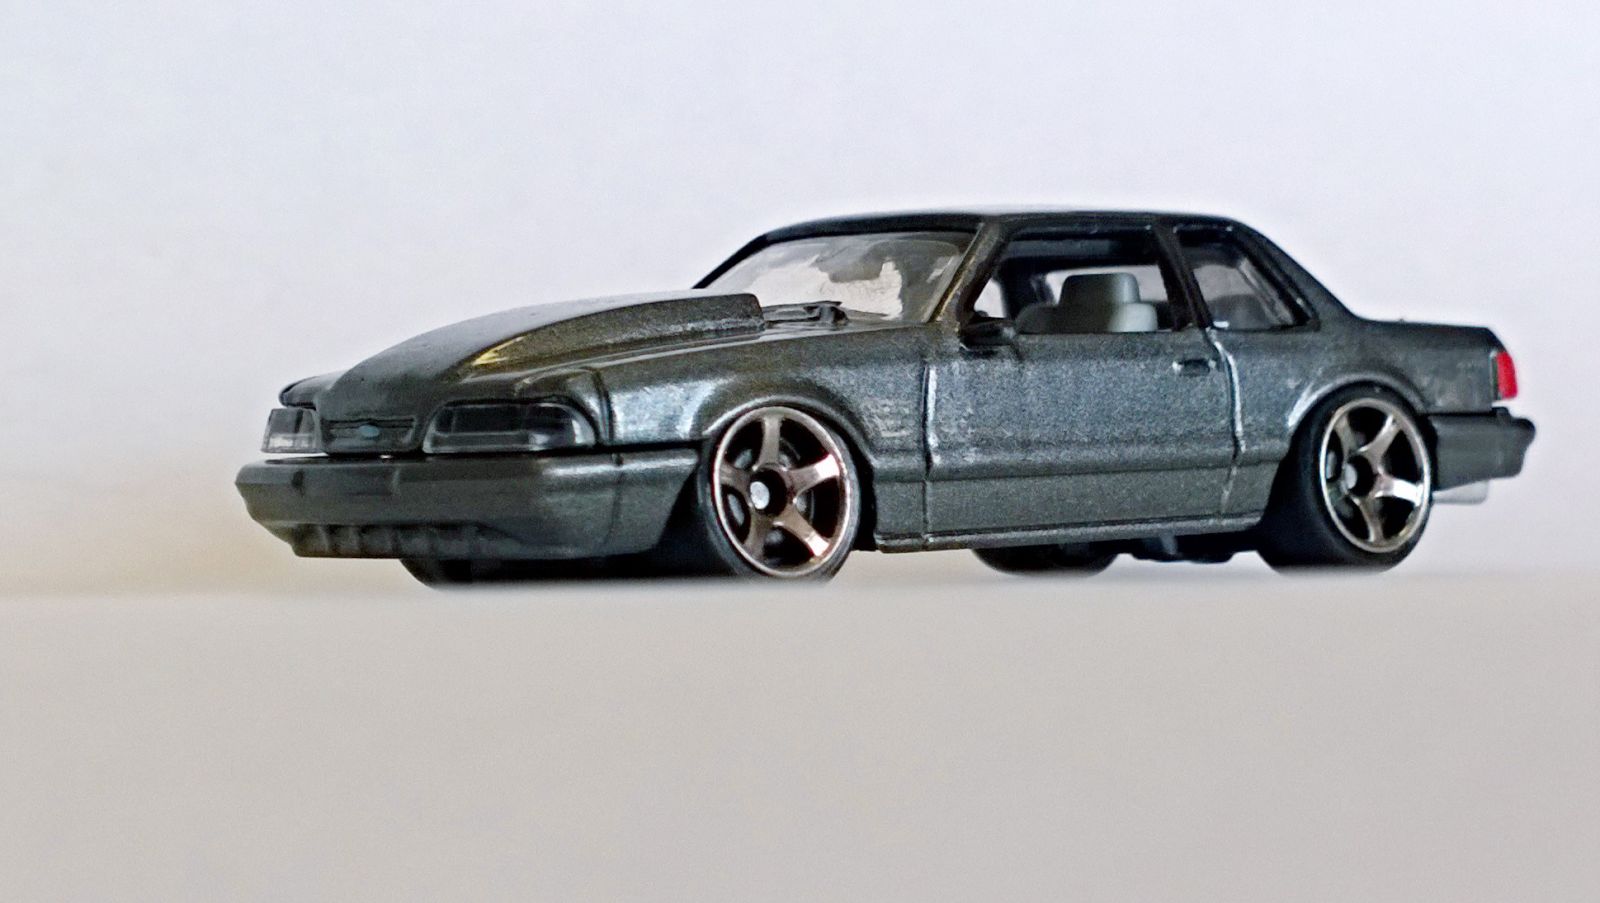 Illustration for article titled CUSTOM 1993 Mustang SSP Coupe - now with IRS!